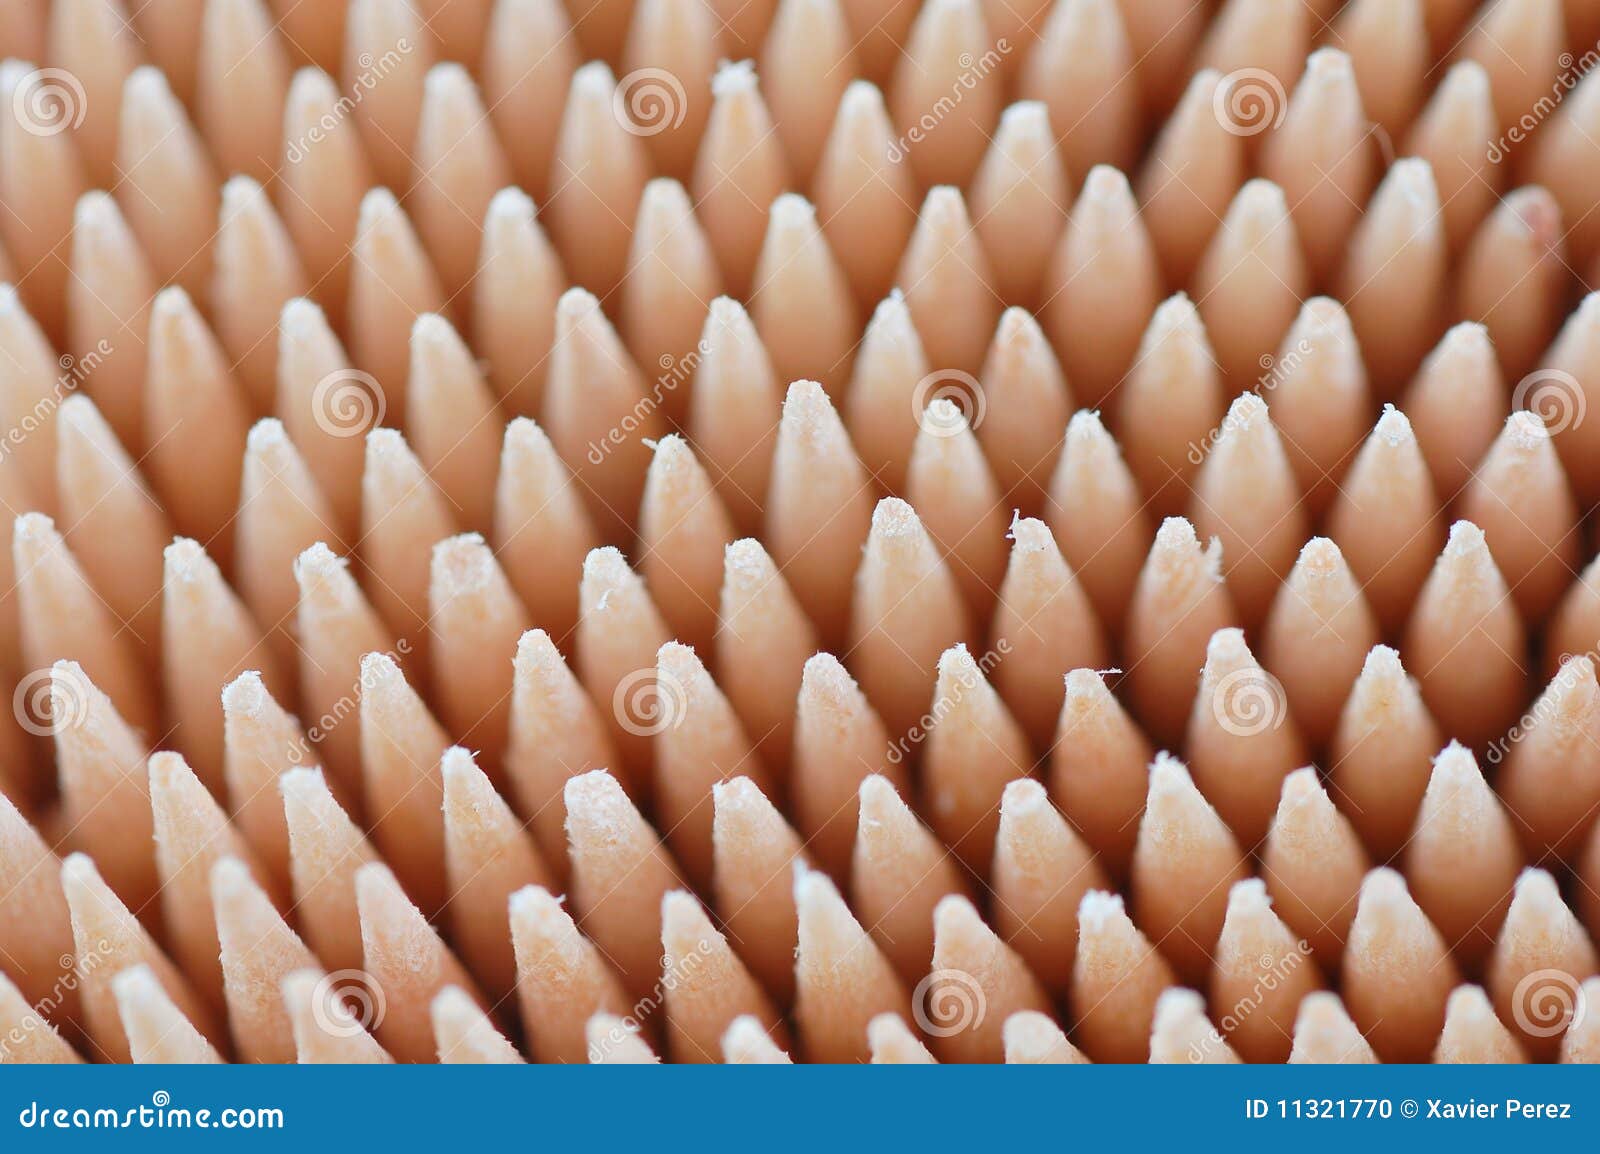 Toothpicks In White Background Stock Photo - Image of care, macro: 11321770